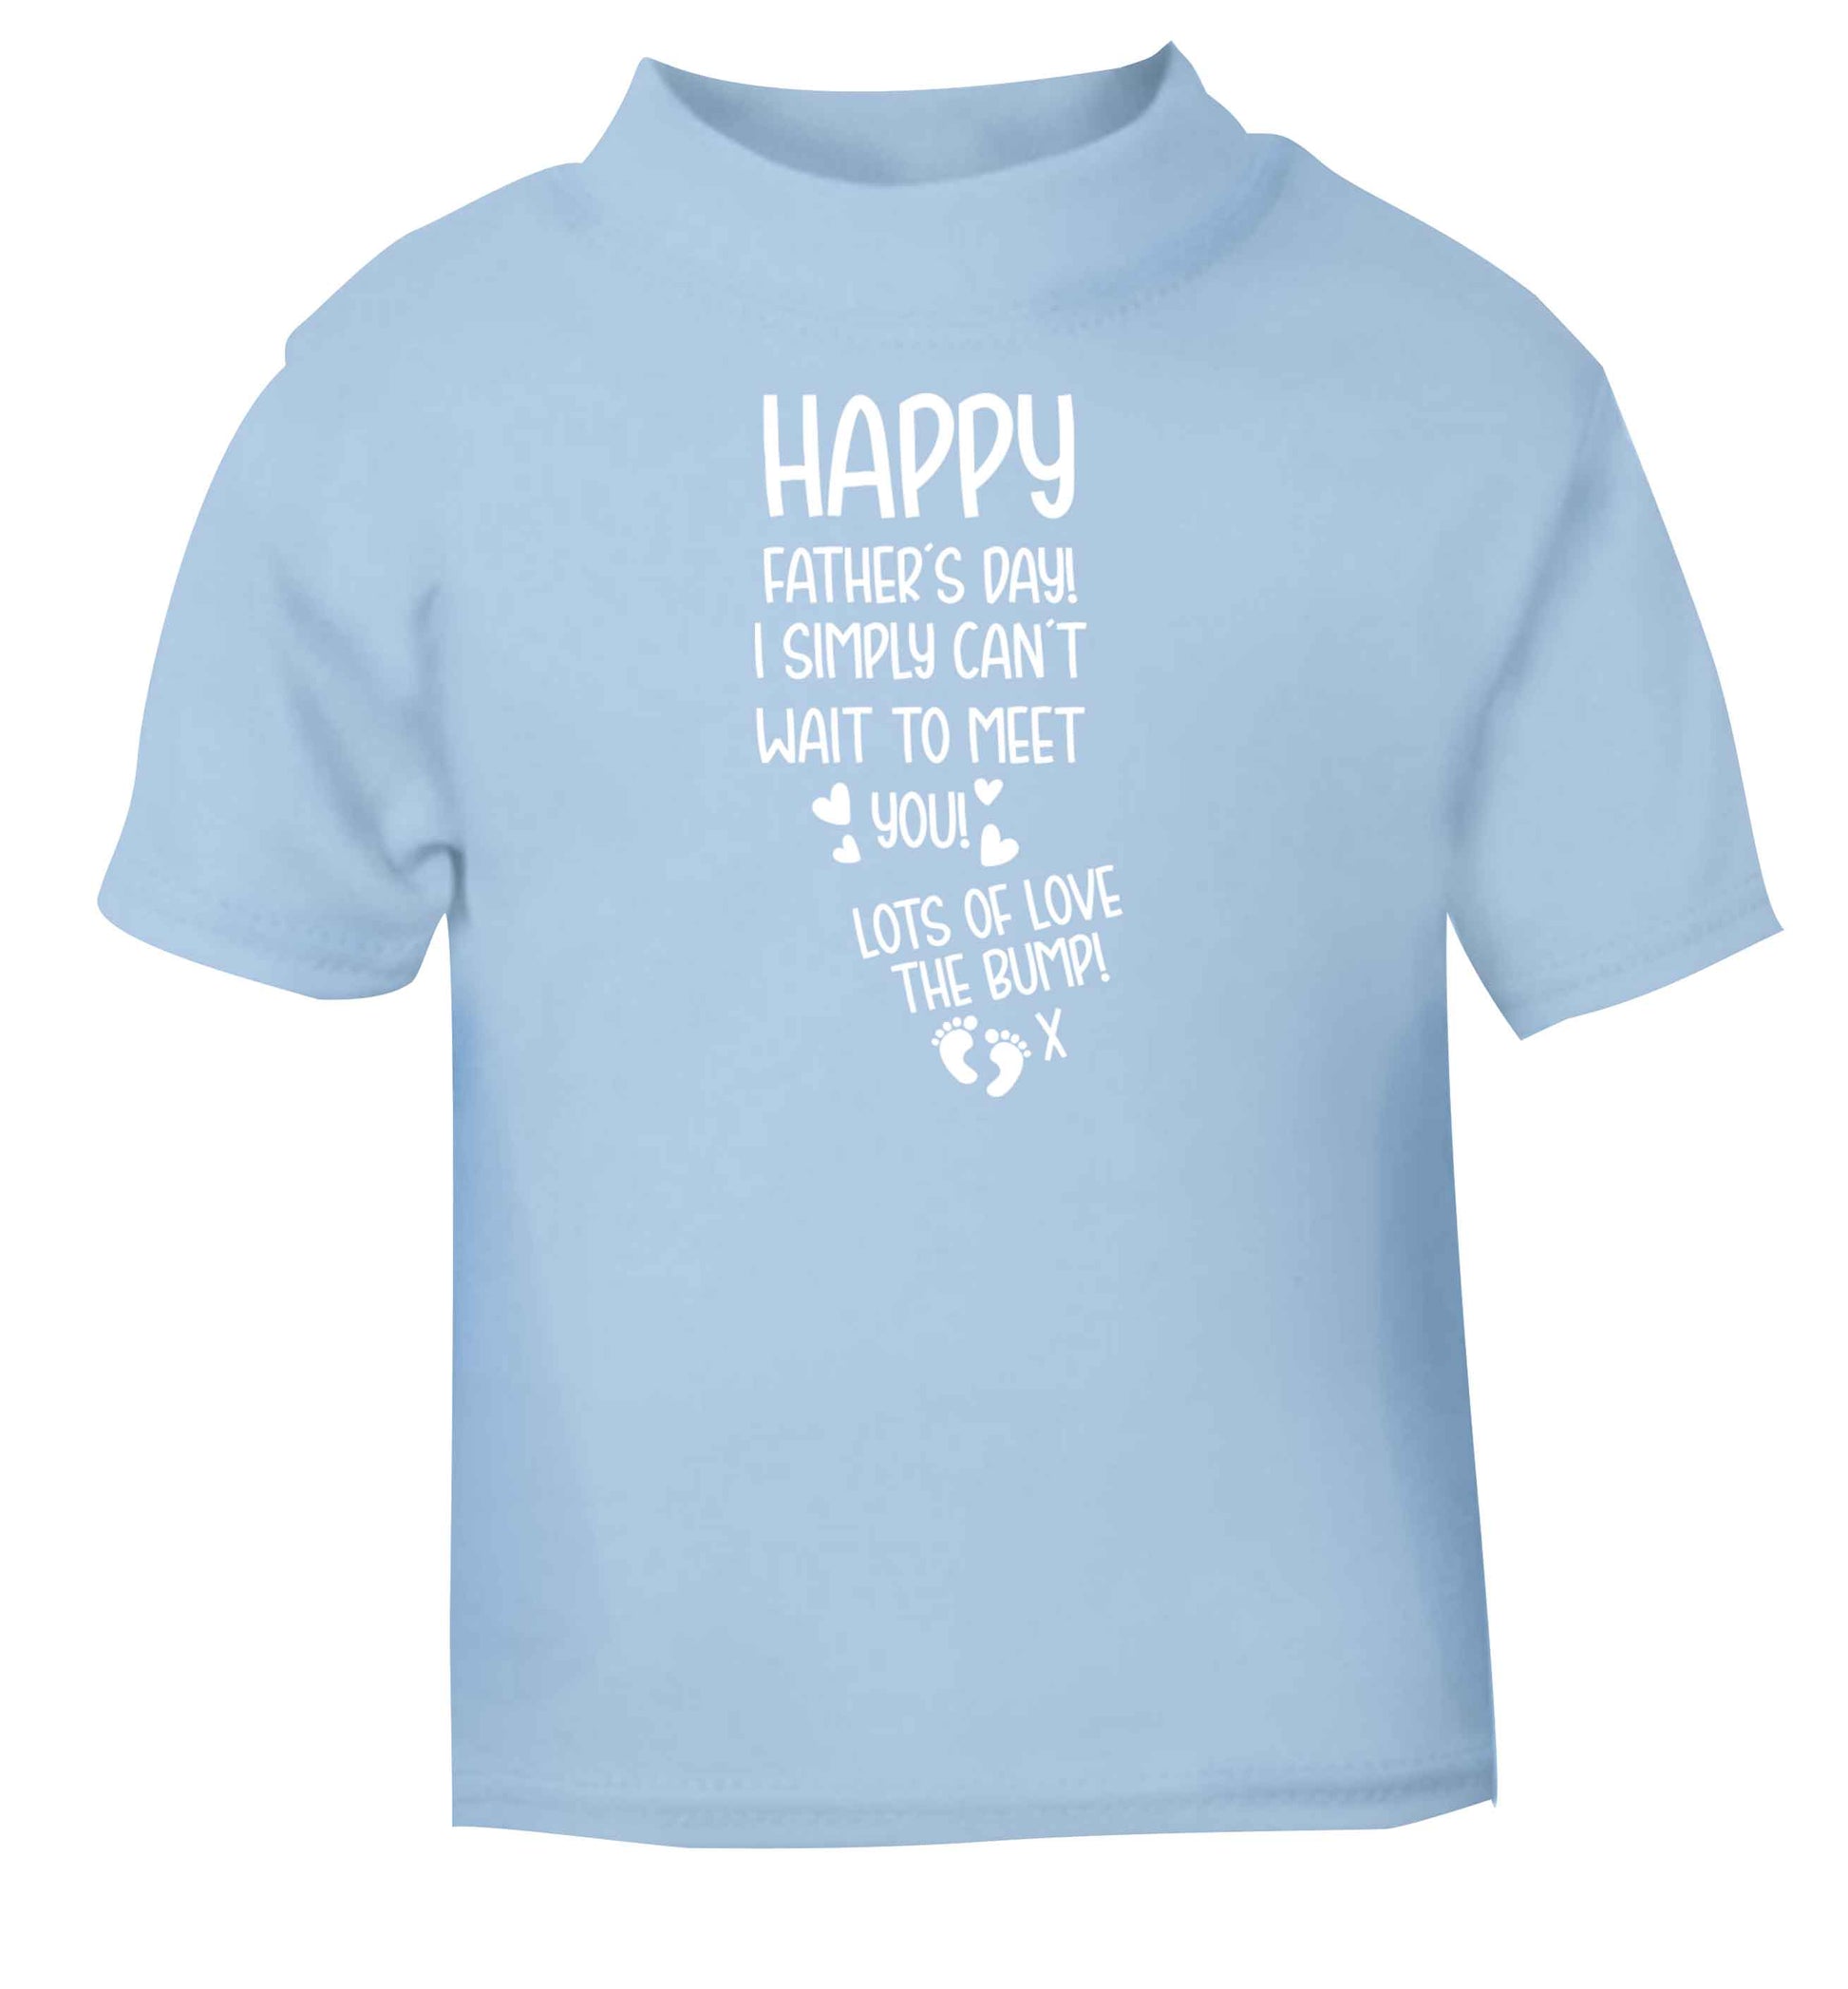 Happy Father's day daddy I can't wait to meet you lot's of love the bump! light blue baby toddler Tshirt 2 Years